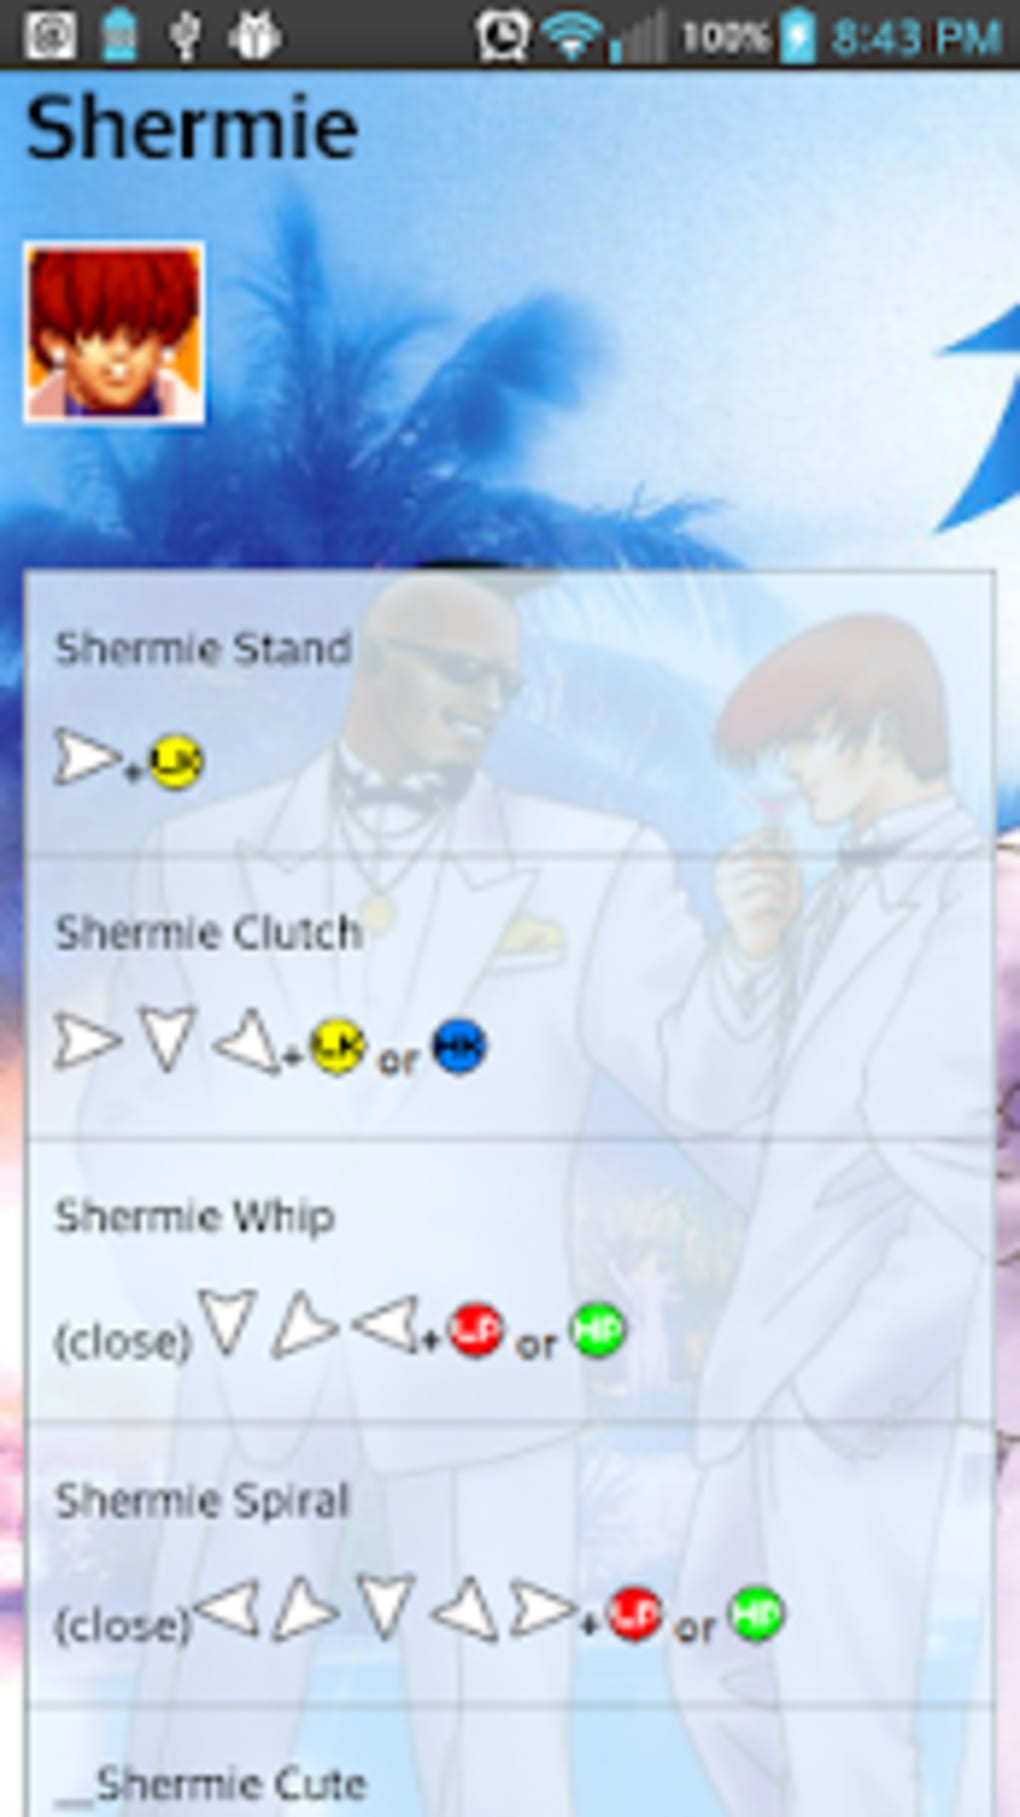 Guide The King of Fighters'98 Apk Download for Android- Latest version 2-  com.arcade.fc.mame.kof98